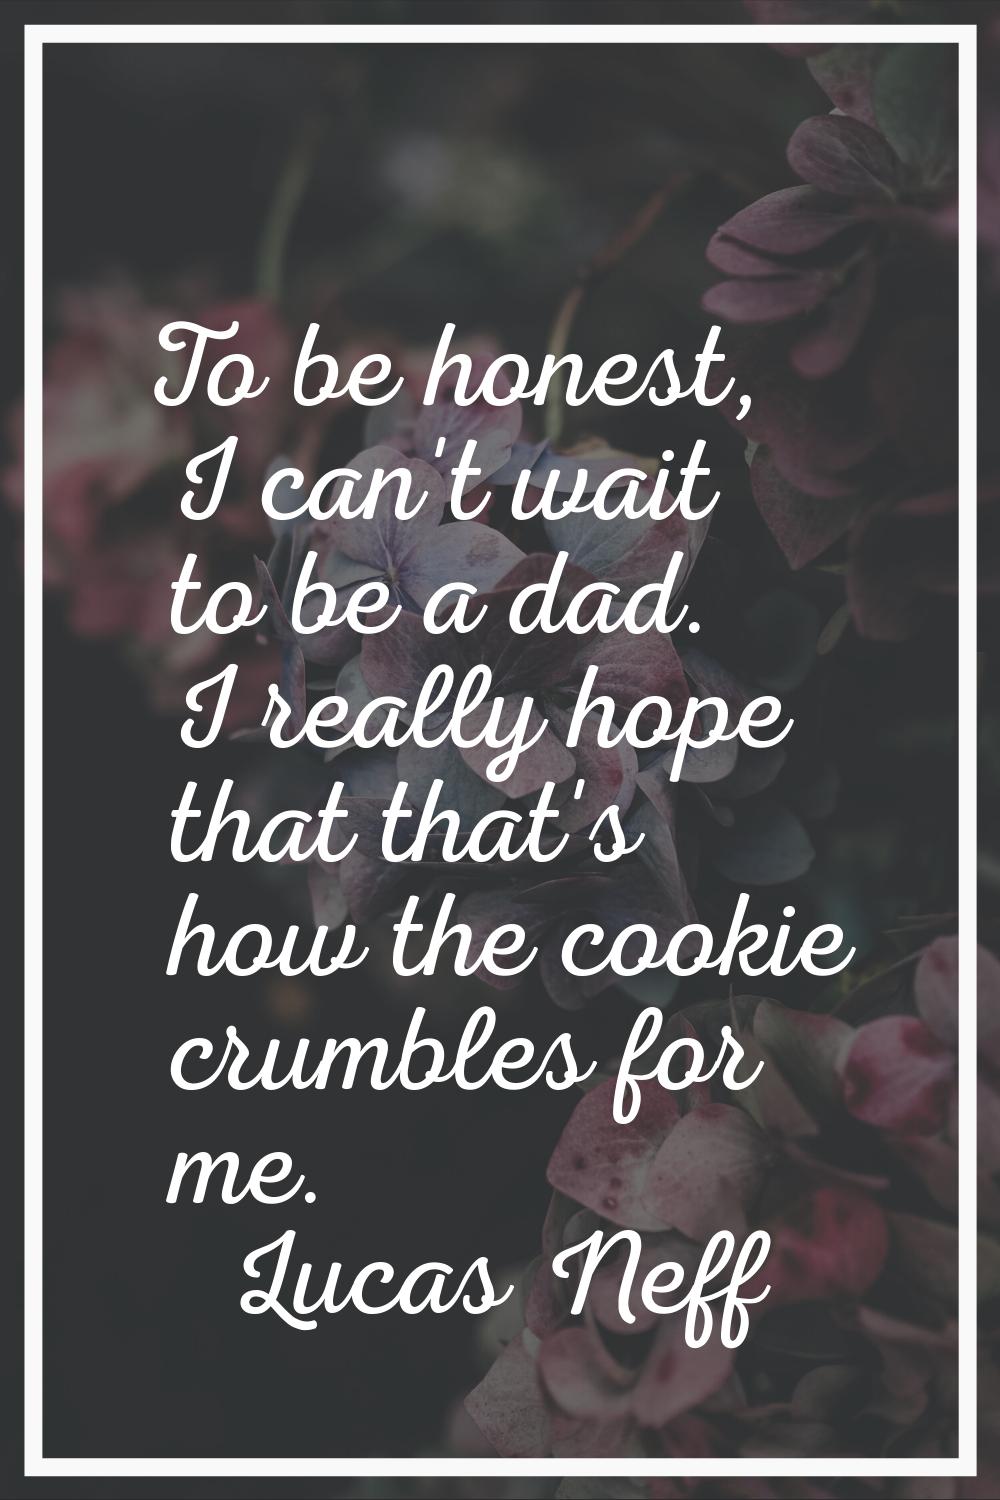 To be honest, I can't wait to be a dad. I really hope that that's how the cookie crumbles for me.